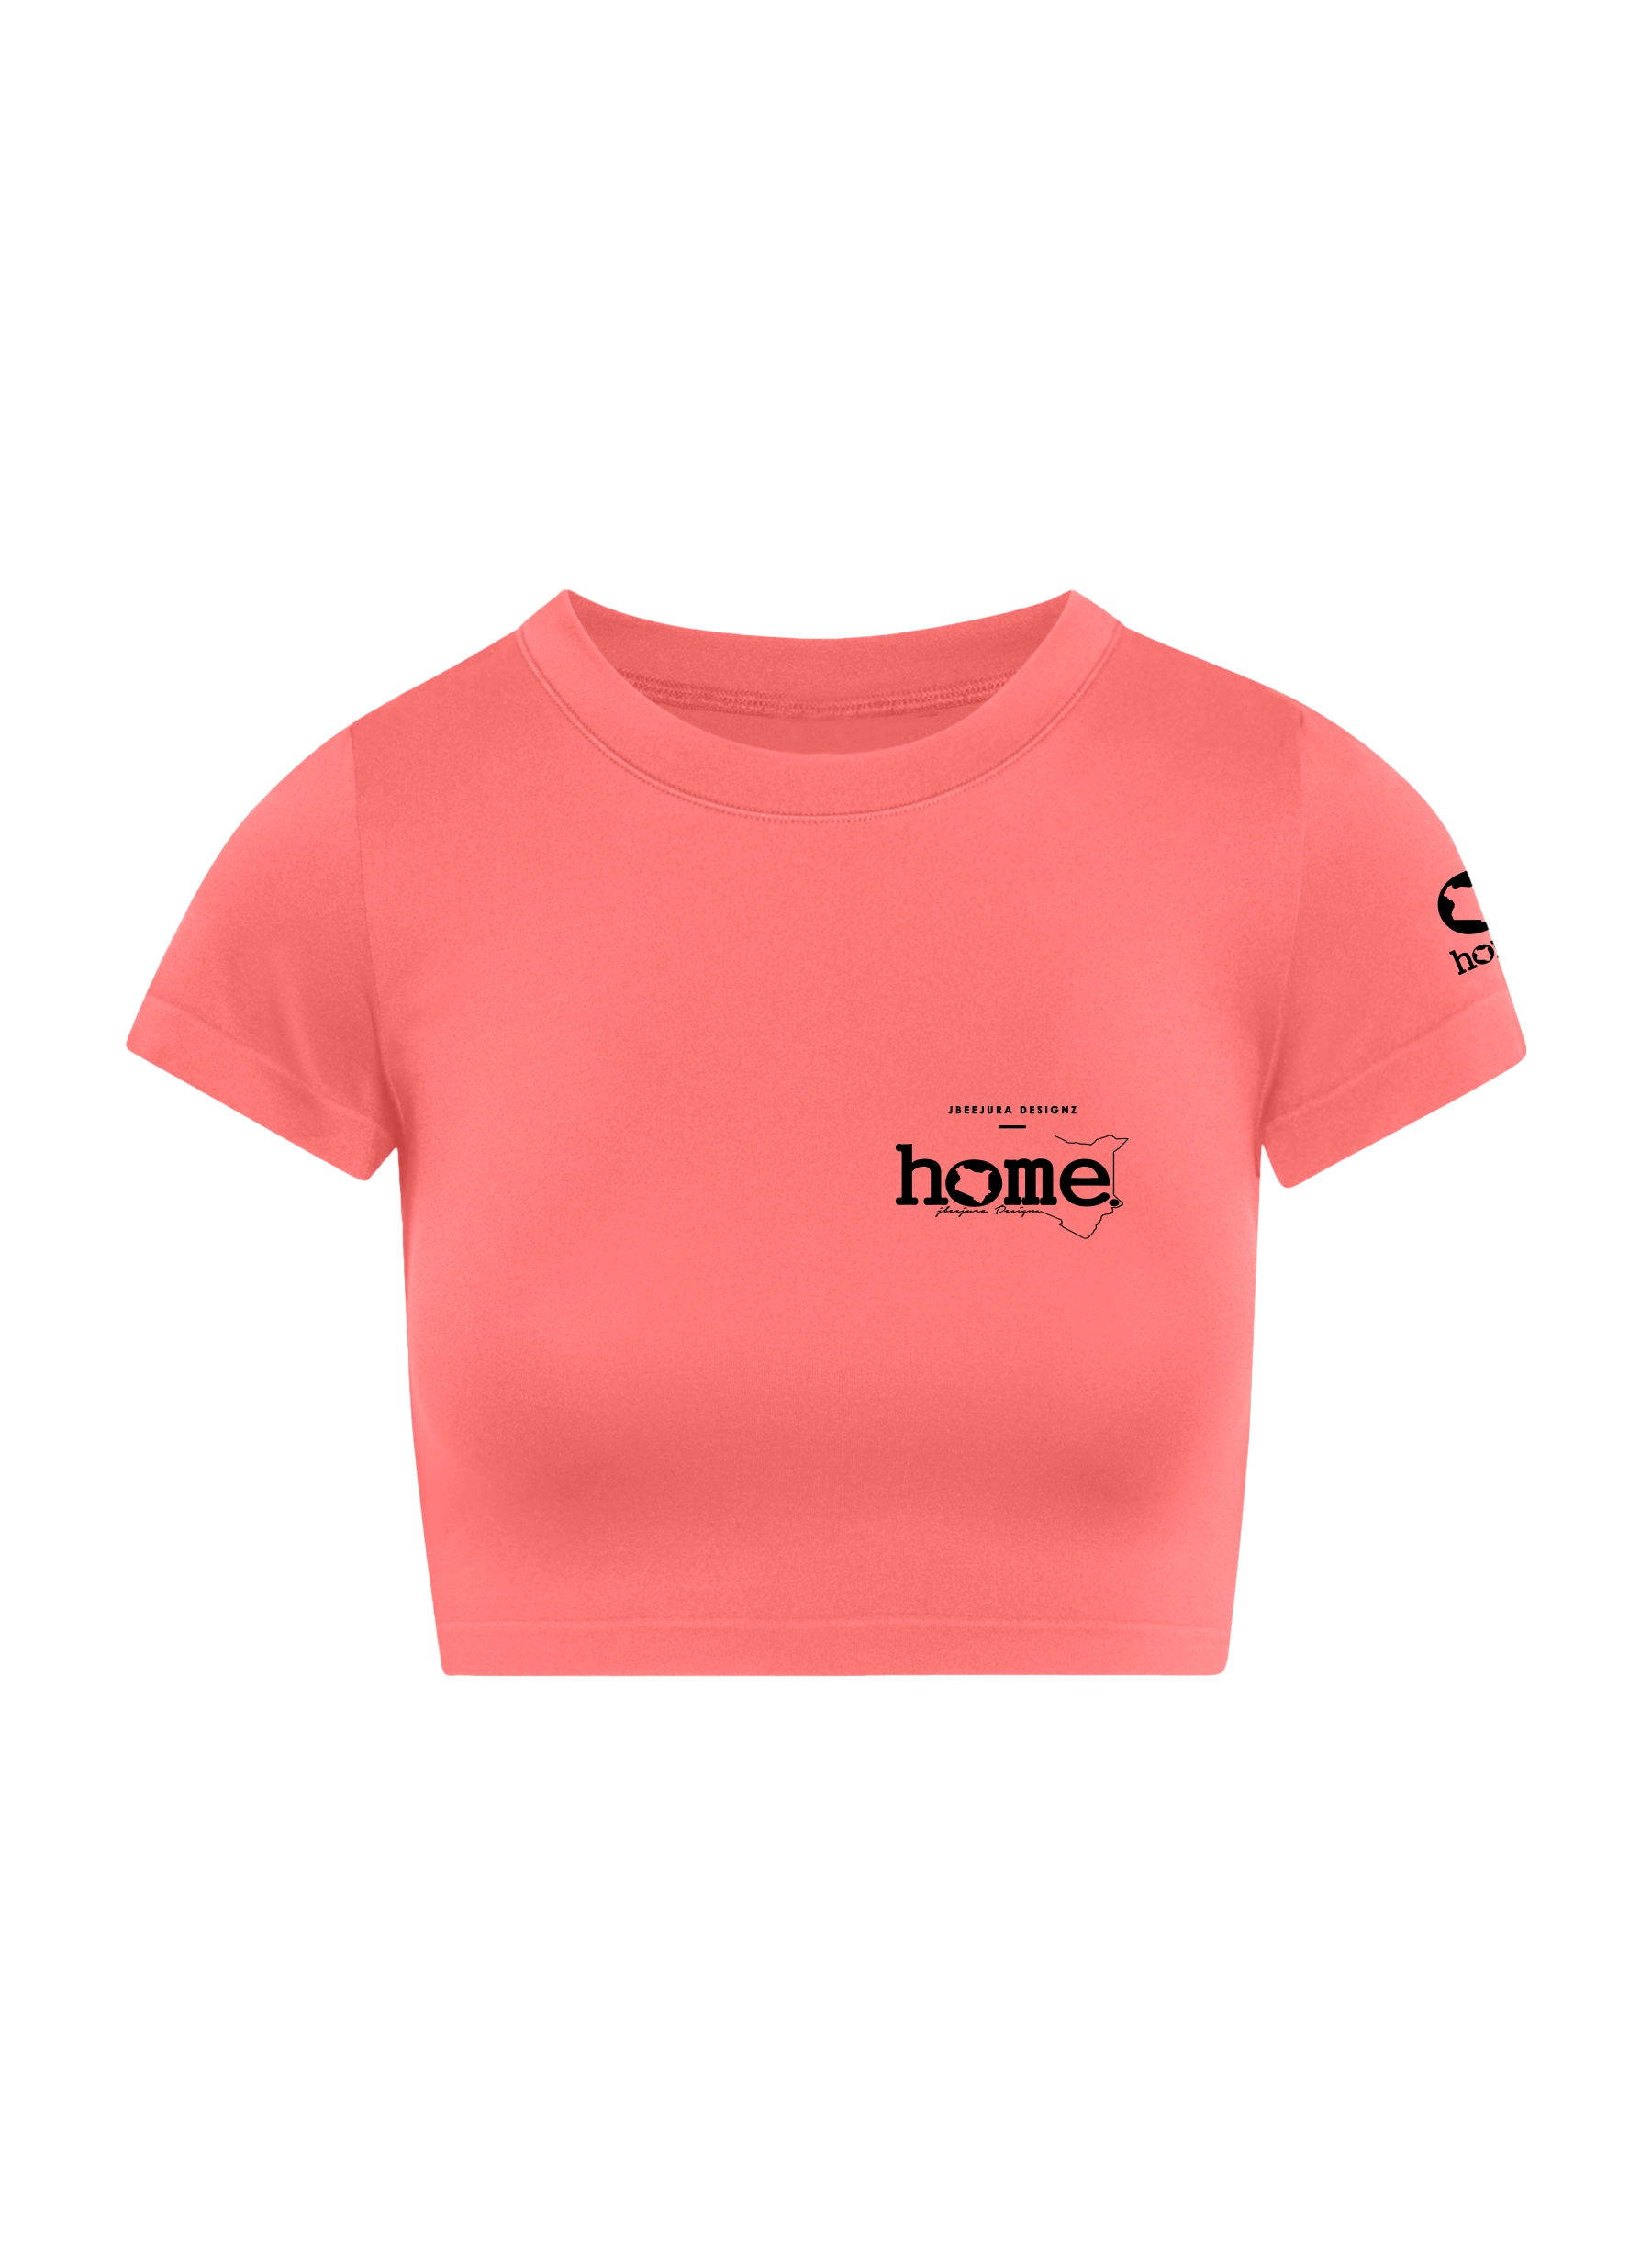 home_254 SHORT SLEEVED MULBERRY CROPPED ARIA TEE WITH A BLACK 3D WORDS PRINT 